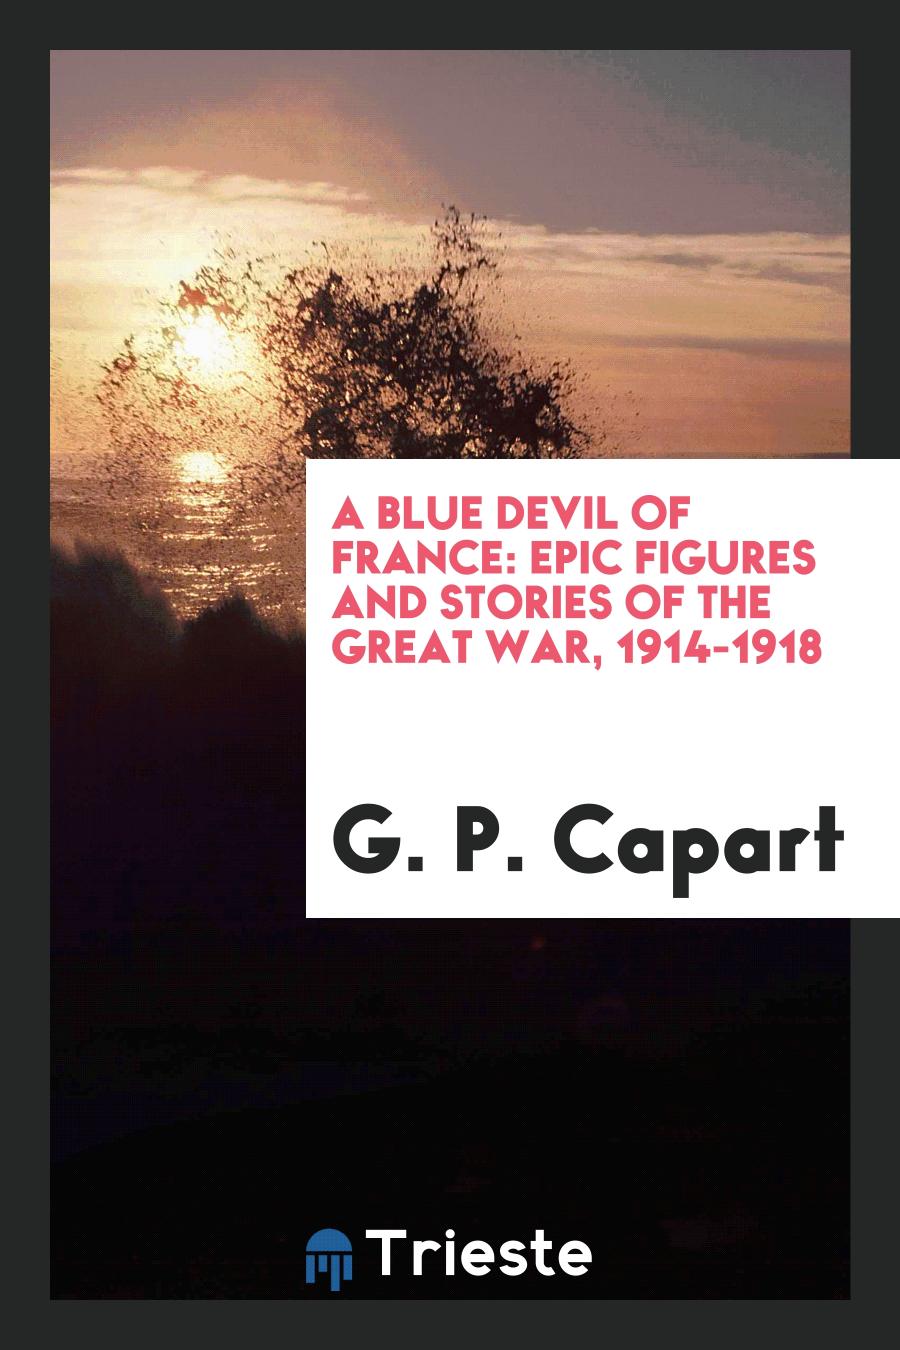 A Blue Devil of France: Epic Figures and Stories of the Great War, 1914-1918